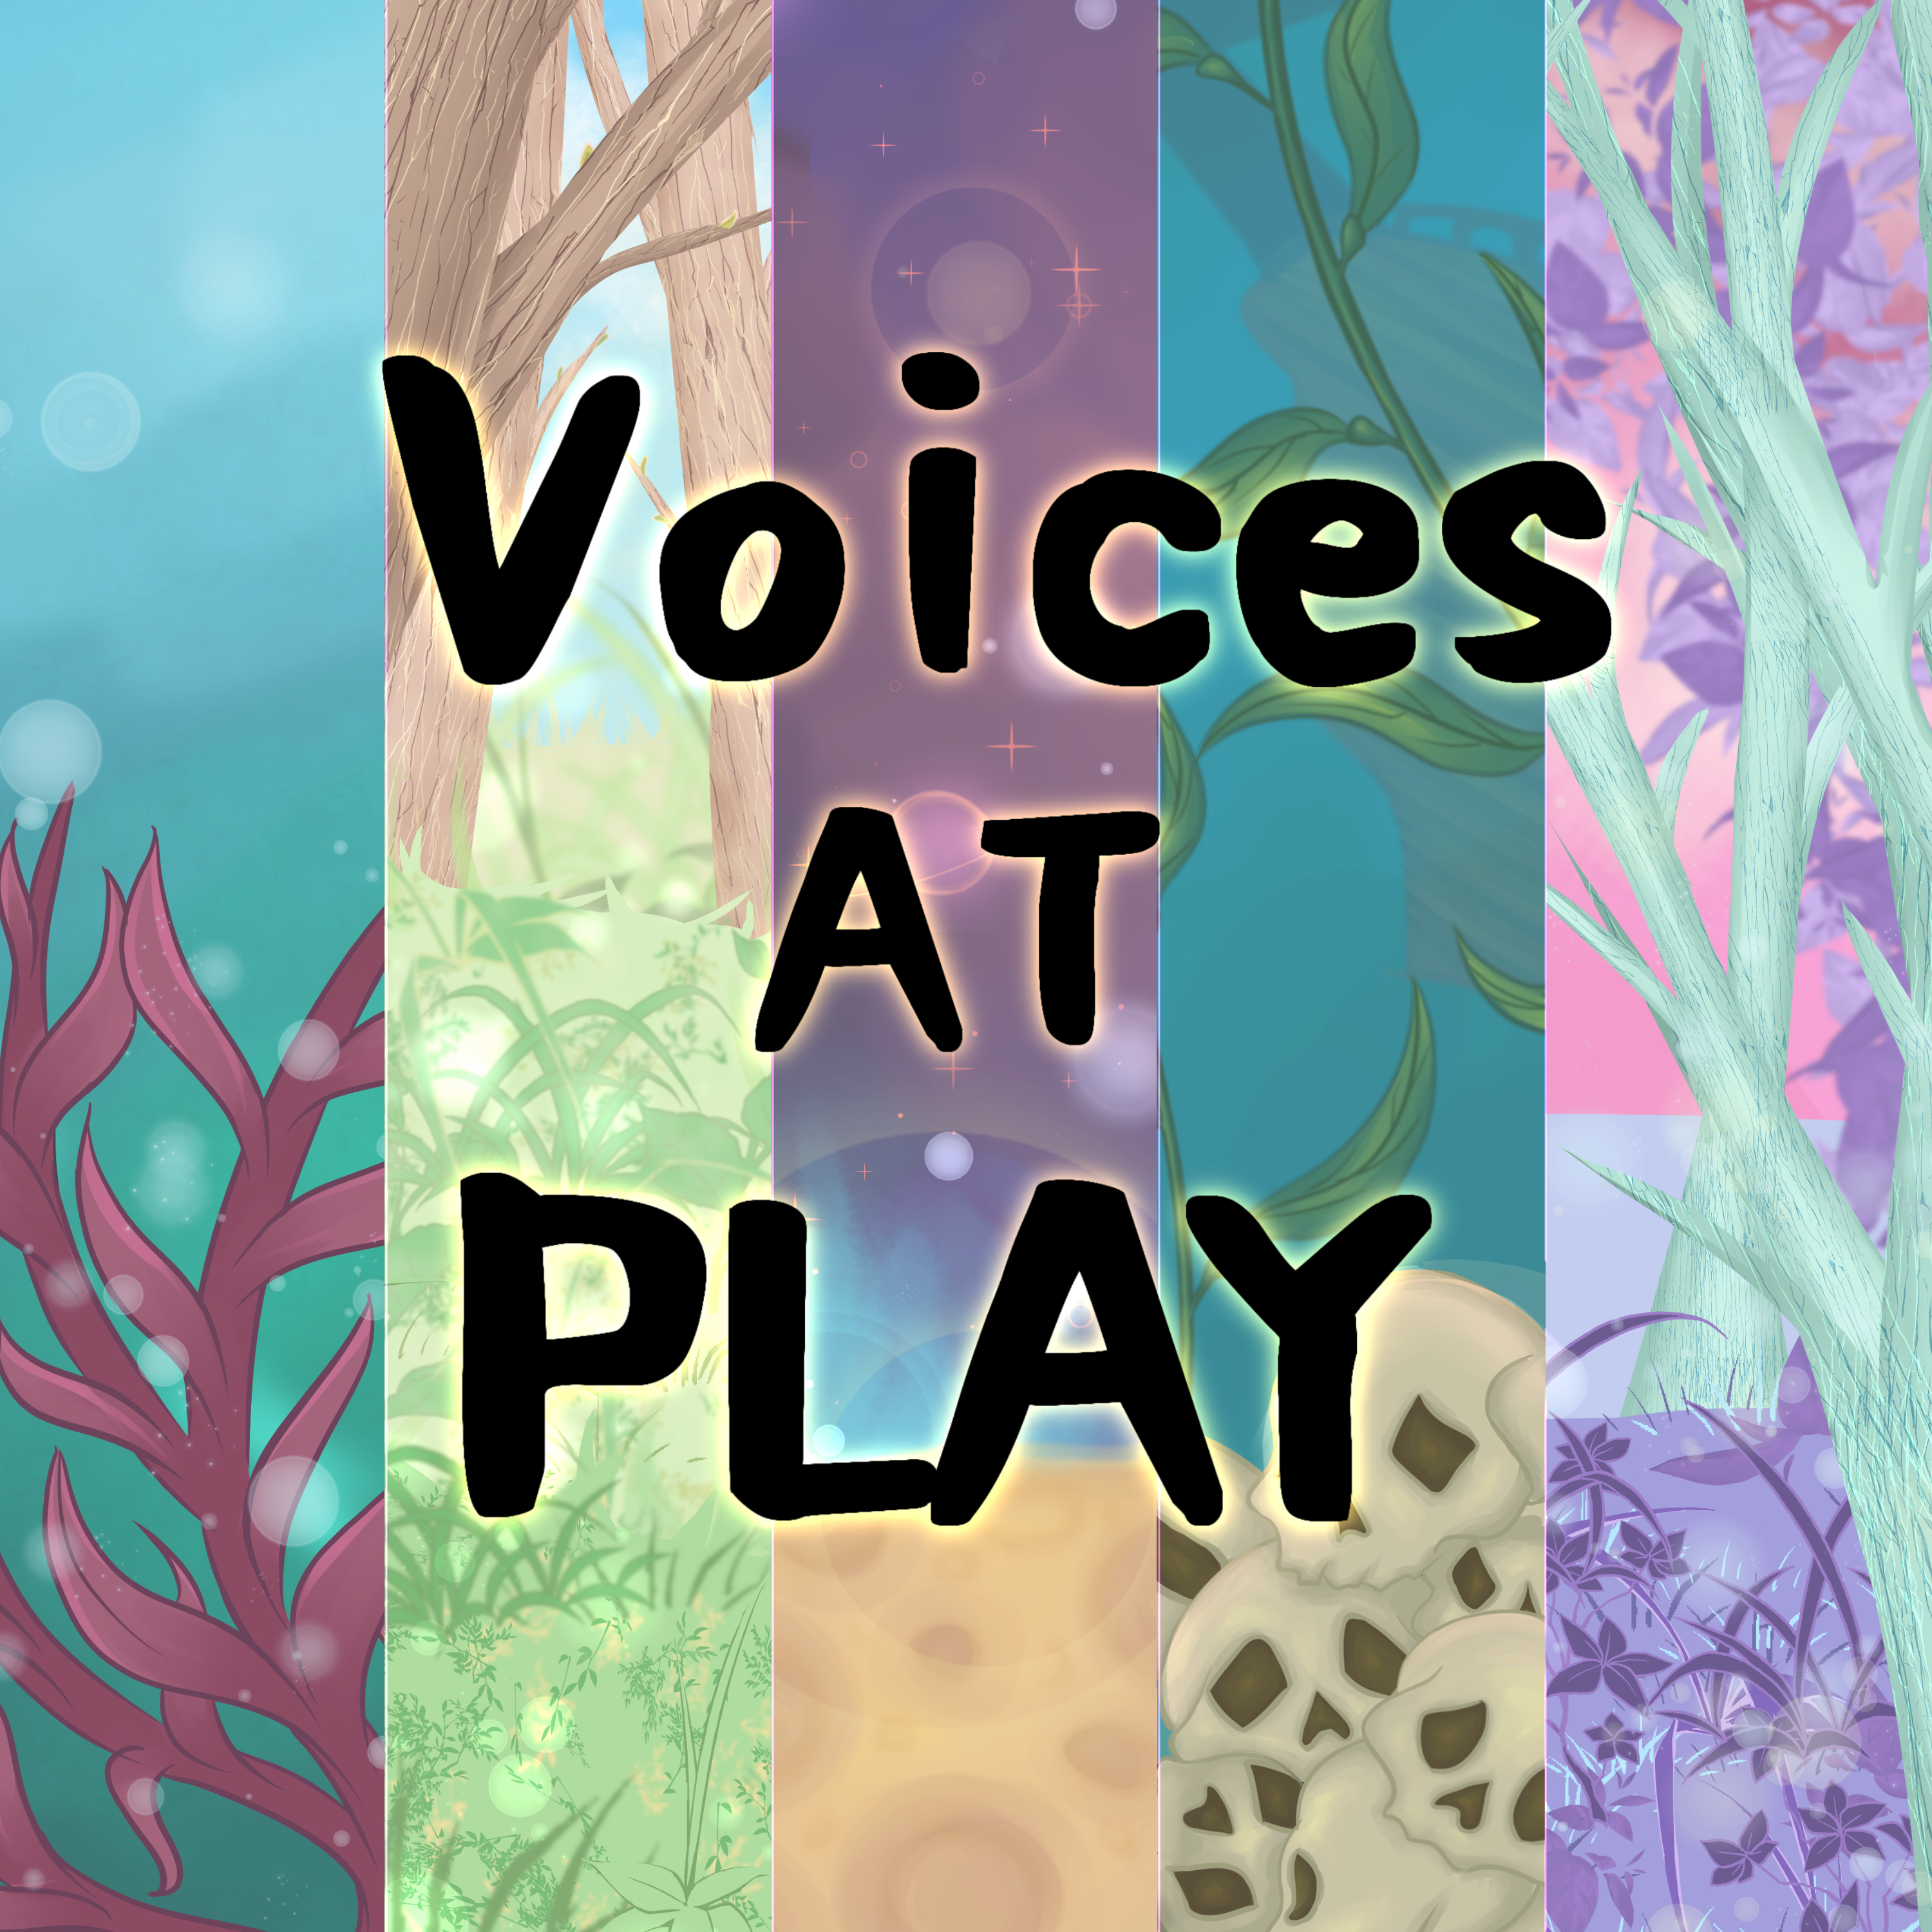 Voice Play. W3 voices